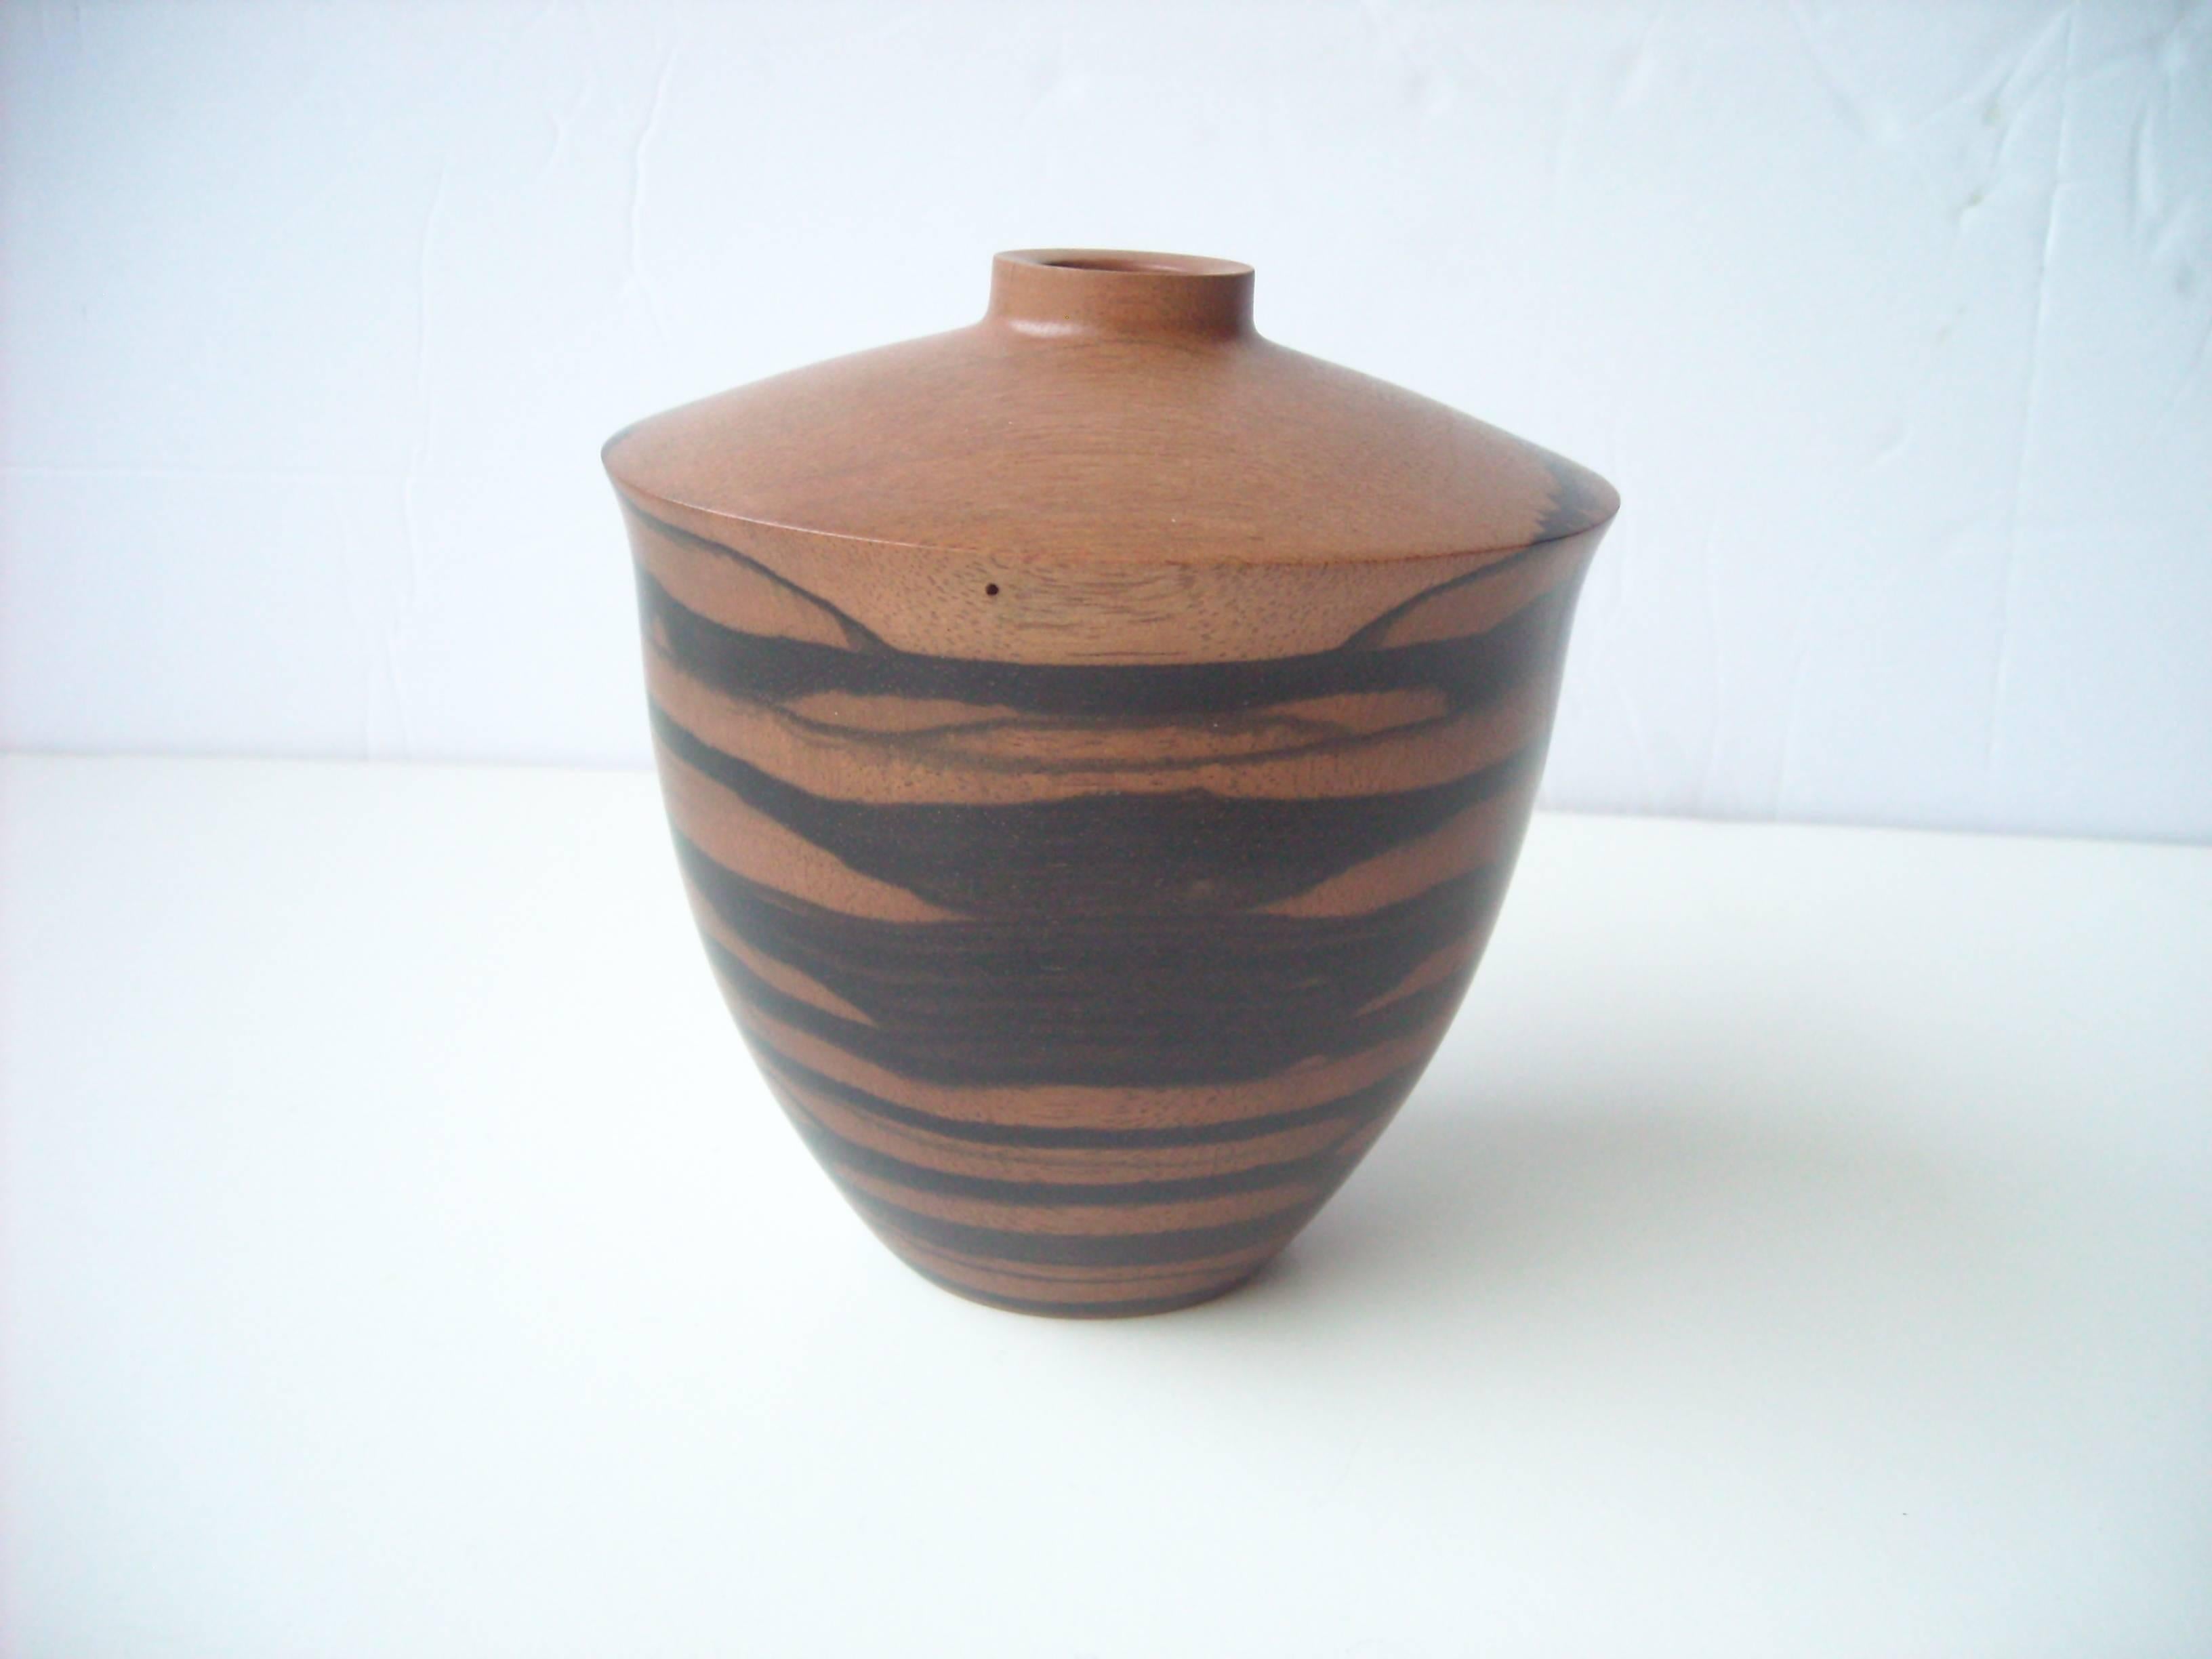 Great Vessel by the well-known artist Dan Kvitka, signed dated, 1999 and number # 46.